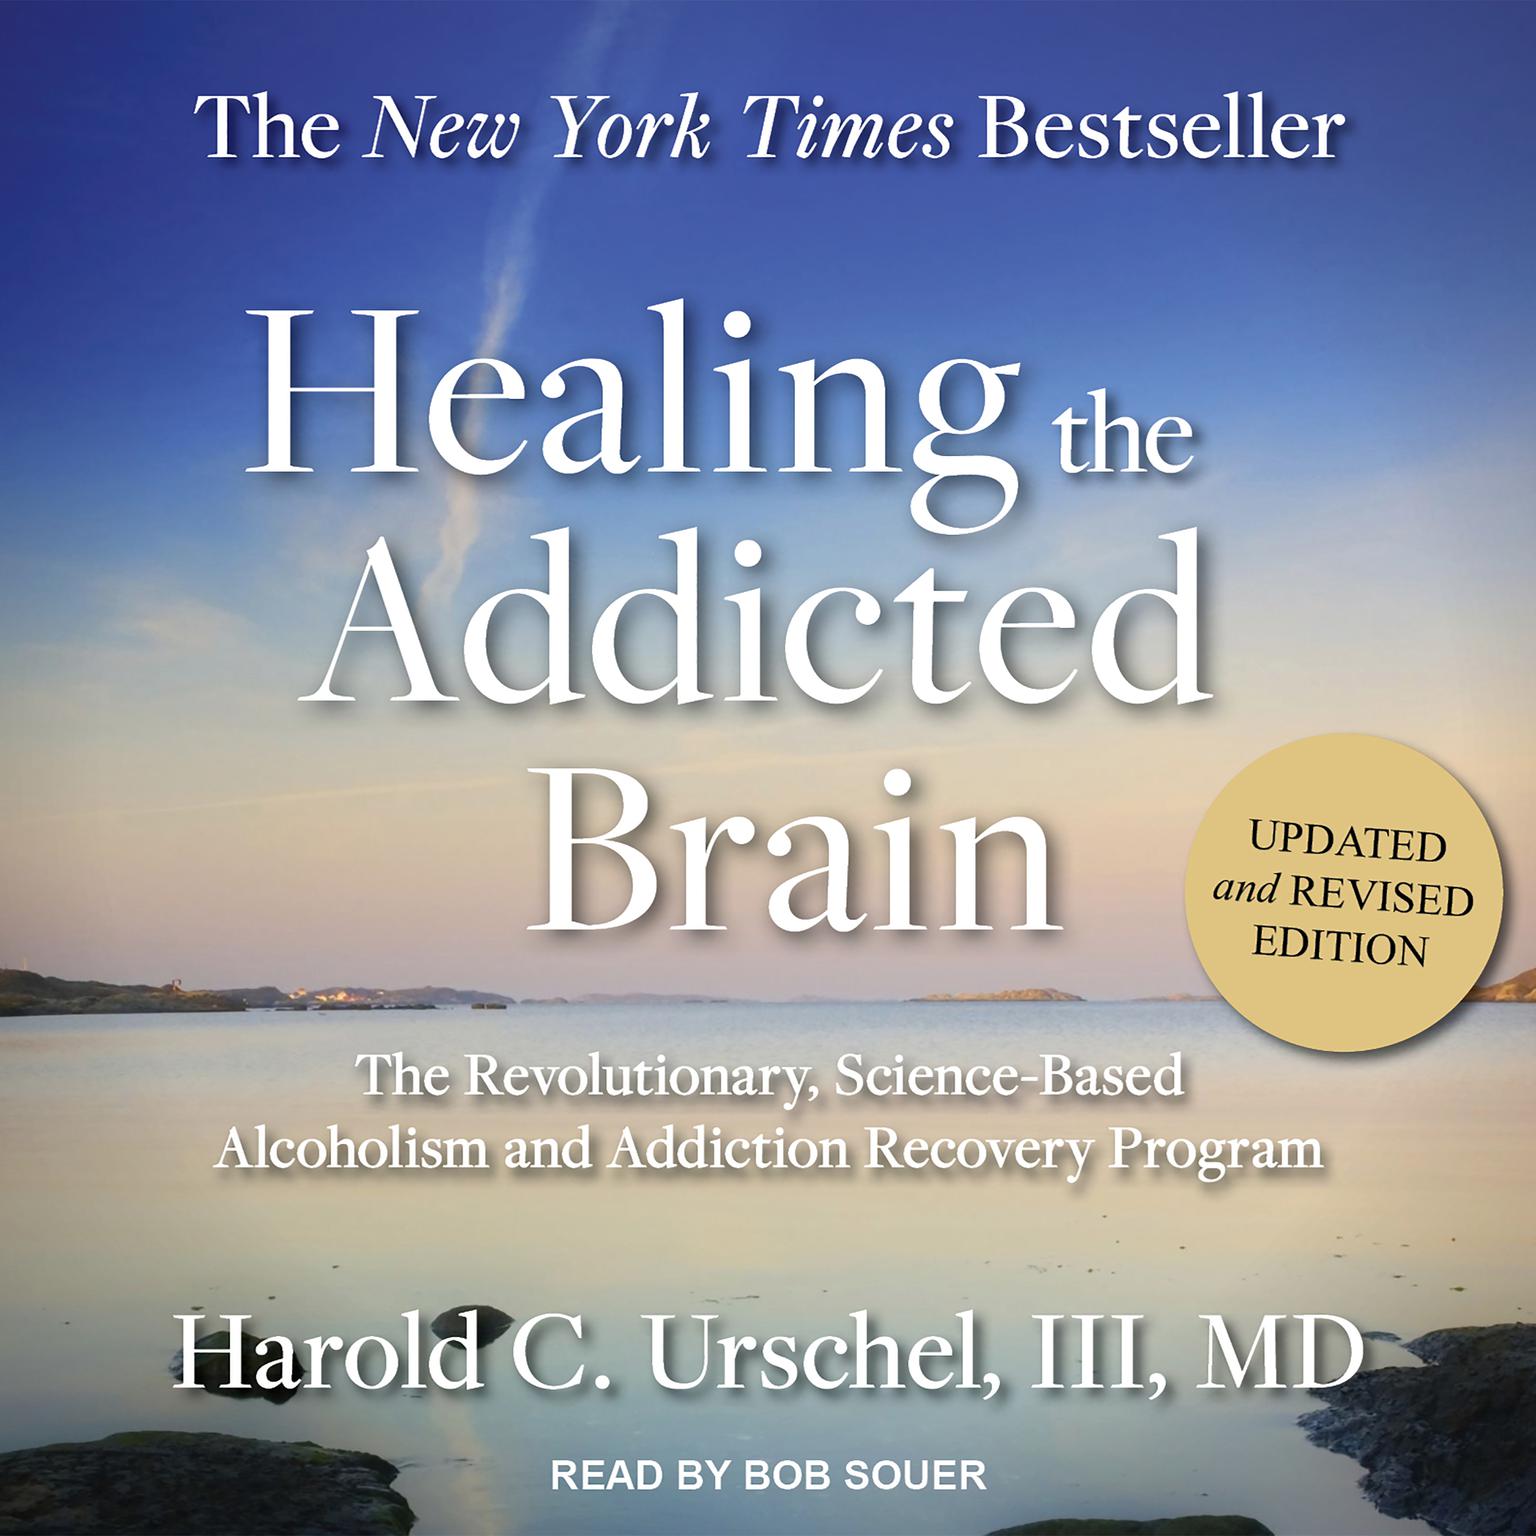 Healing the Addicted Brain: The Revolutionary, Science-Based Alcoholism and Addiction Recovery Program Audiobook, by Harold C. Urschel